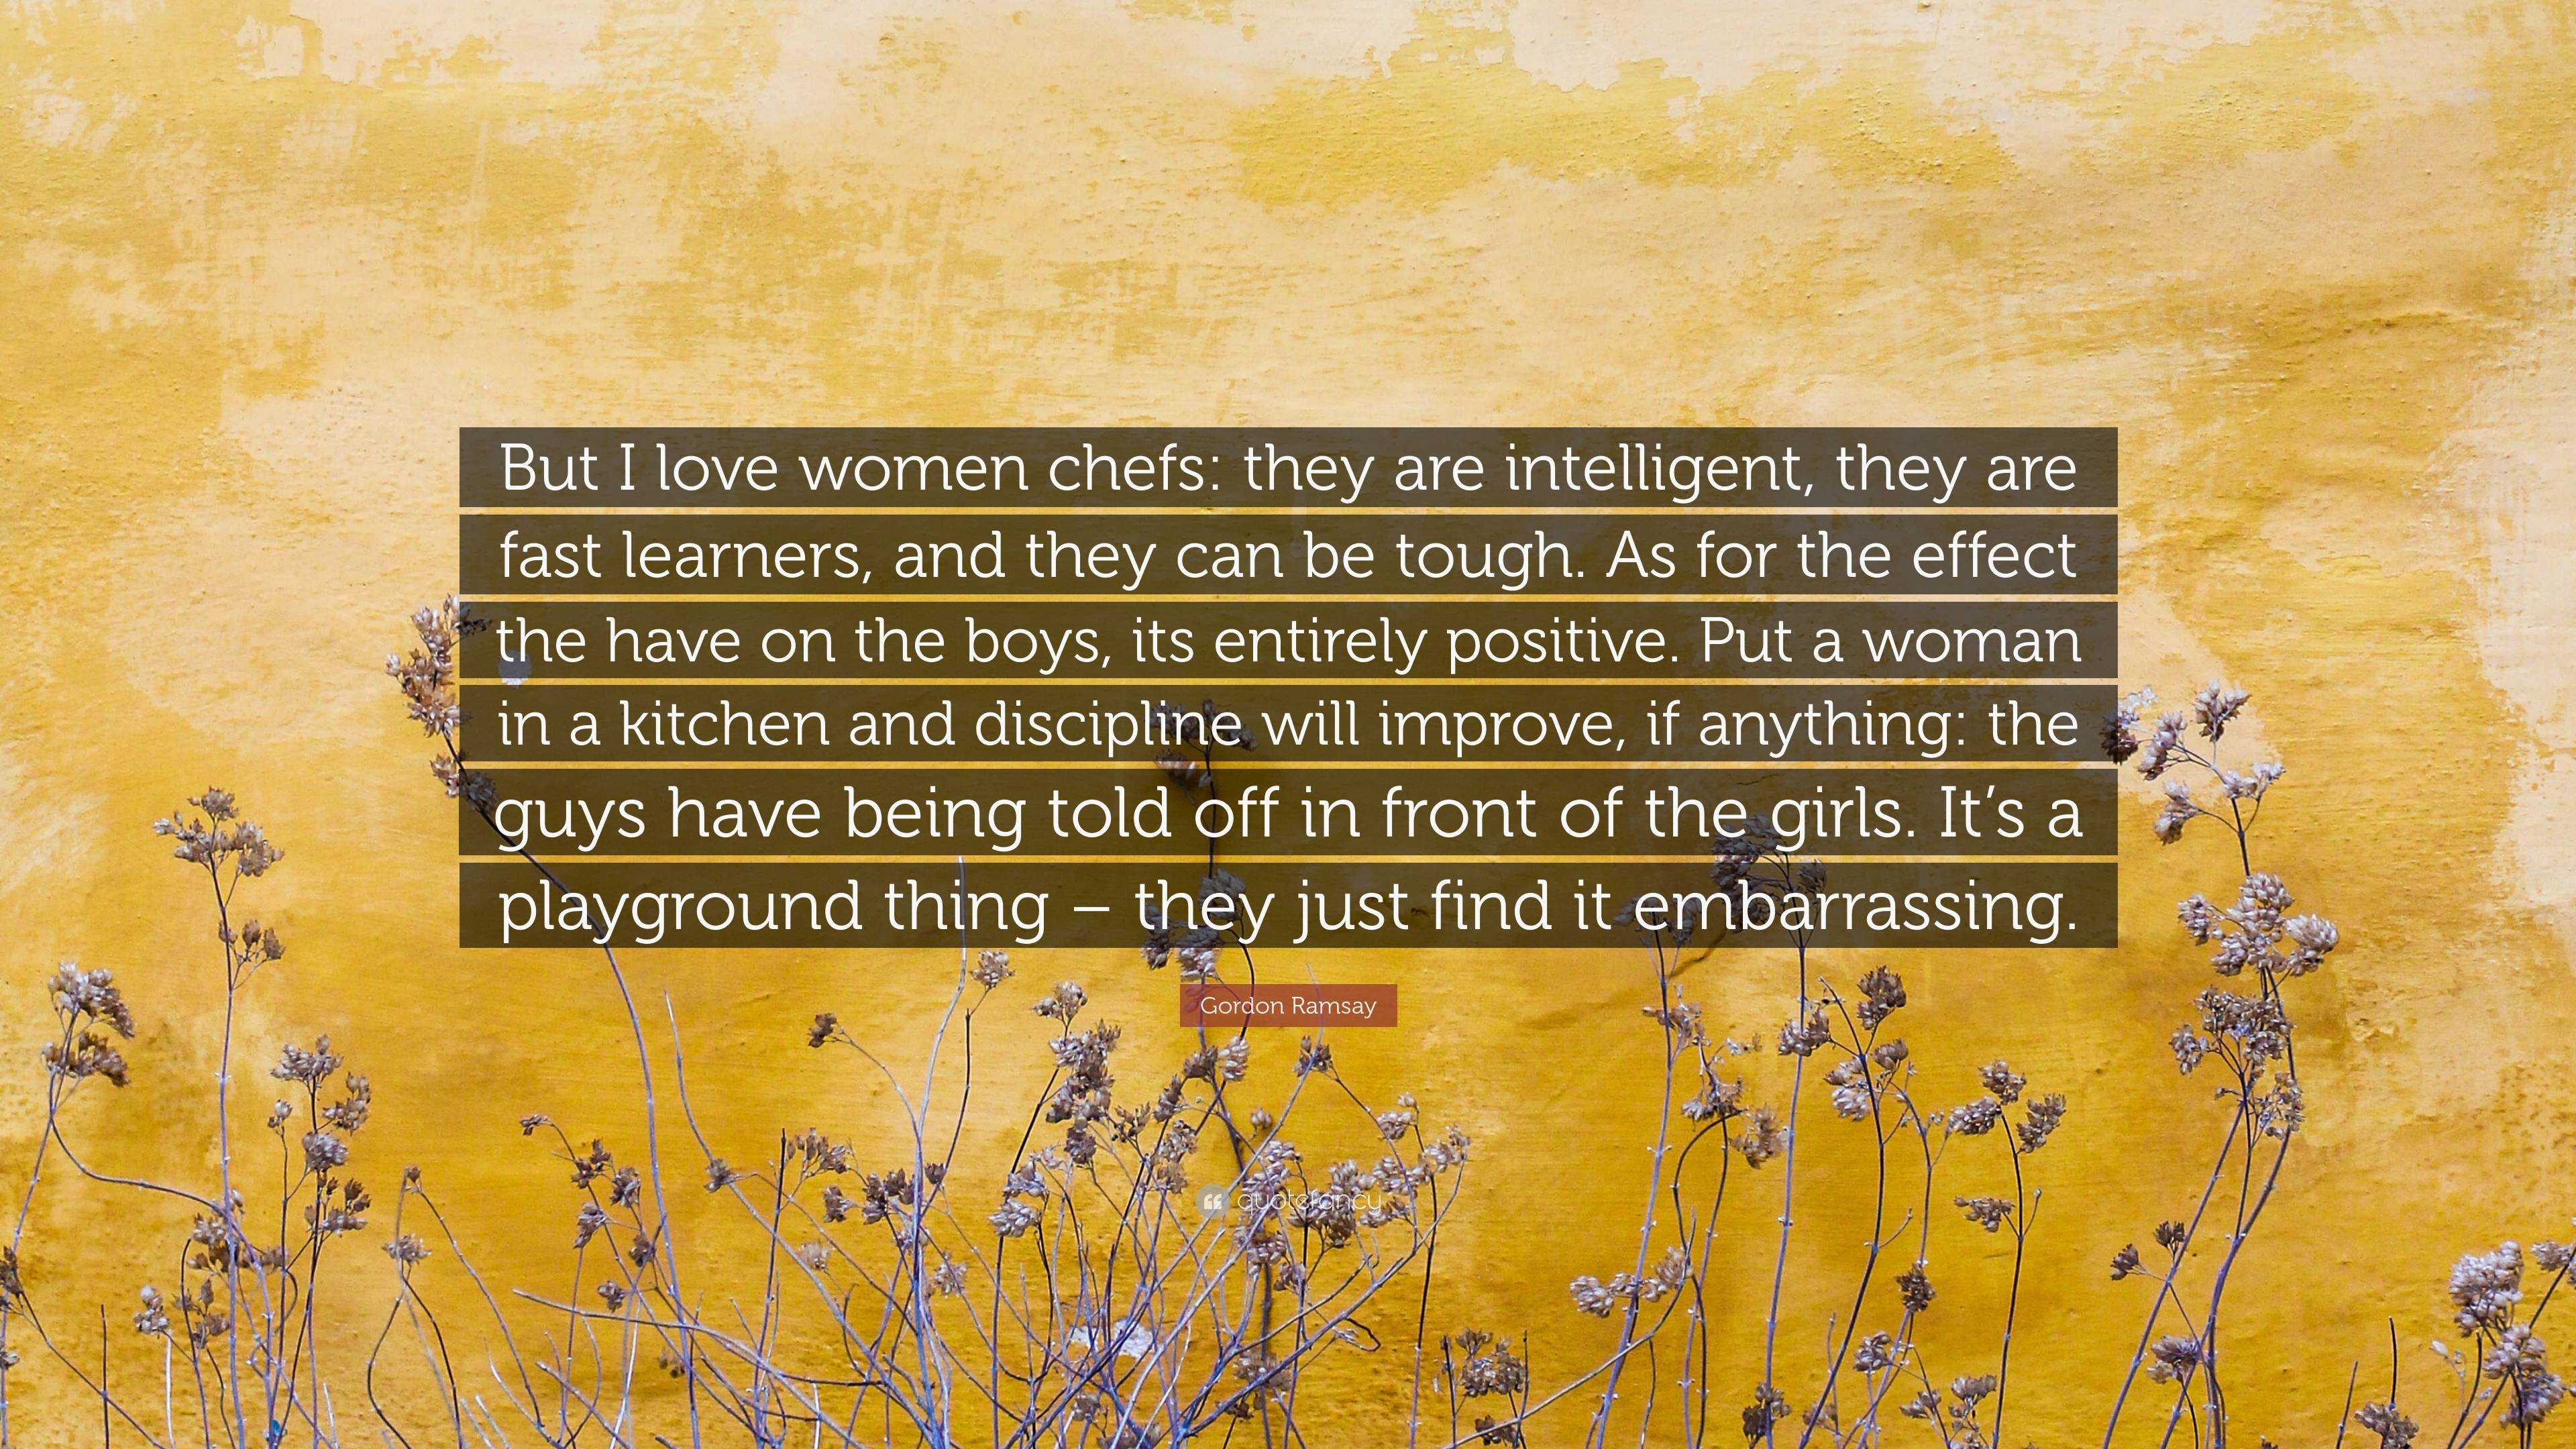 Gordon Ramsay Quote: “But I love women chefs: they are intelligent ...